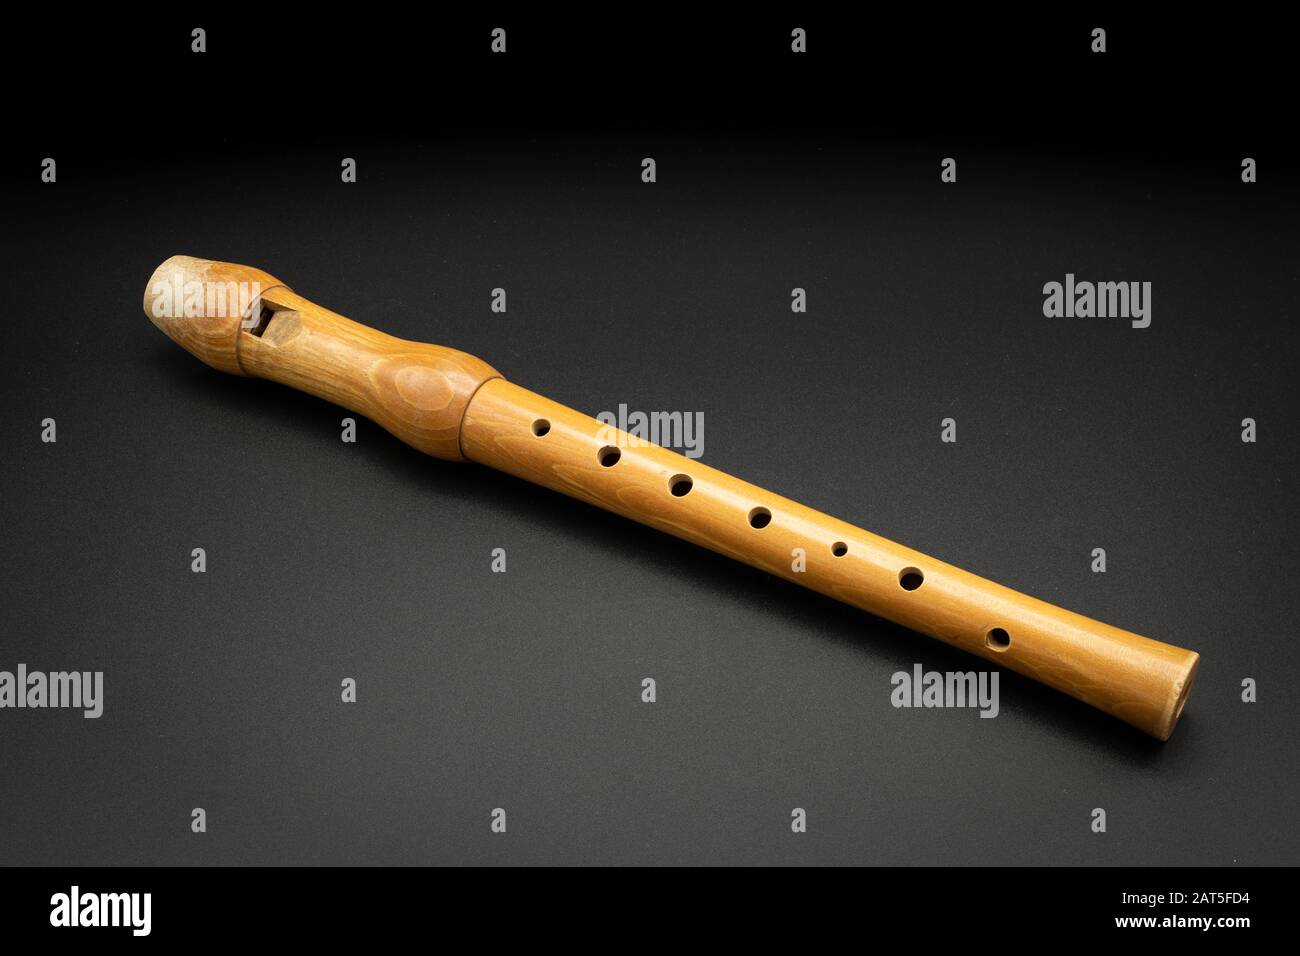 Page 3 - Recorder Flute High Resolution Stock Photography and Images - Alamy